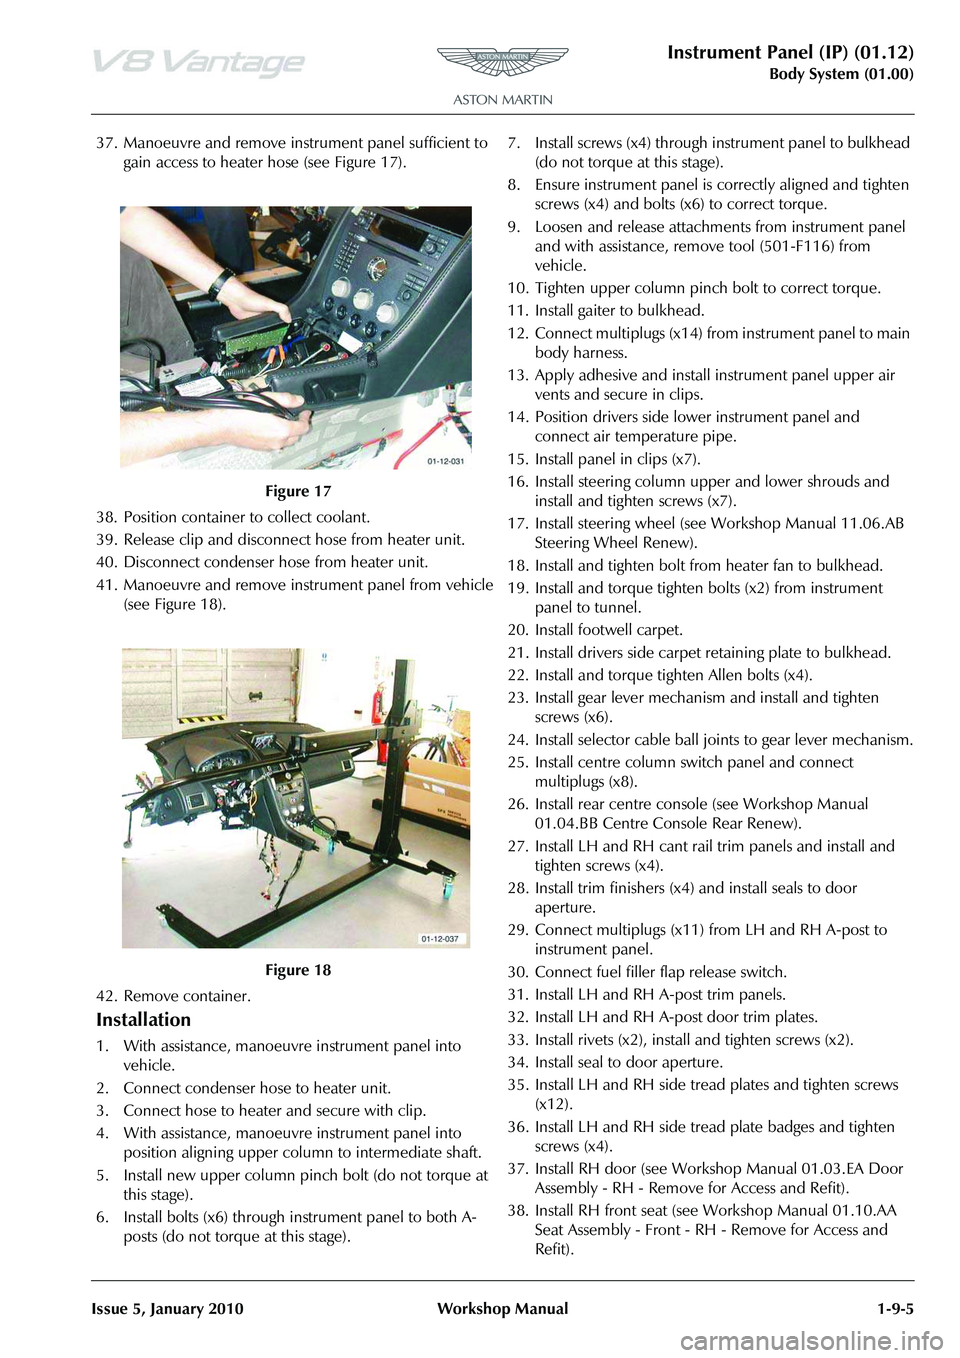 ASTON MARTIN V8 VANTAGE 2010  Workshop Manual Instrument Panel (IP) (01.12)
Body System (01.00)
Issue 5, January 2010 Workshop Manual 1-9-5
37. Manoeuvre and remove inst rument panel sufficient to 
gain access to heater hose (see Figure 17).
38. 